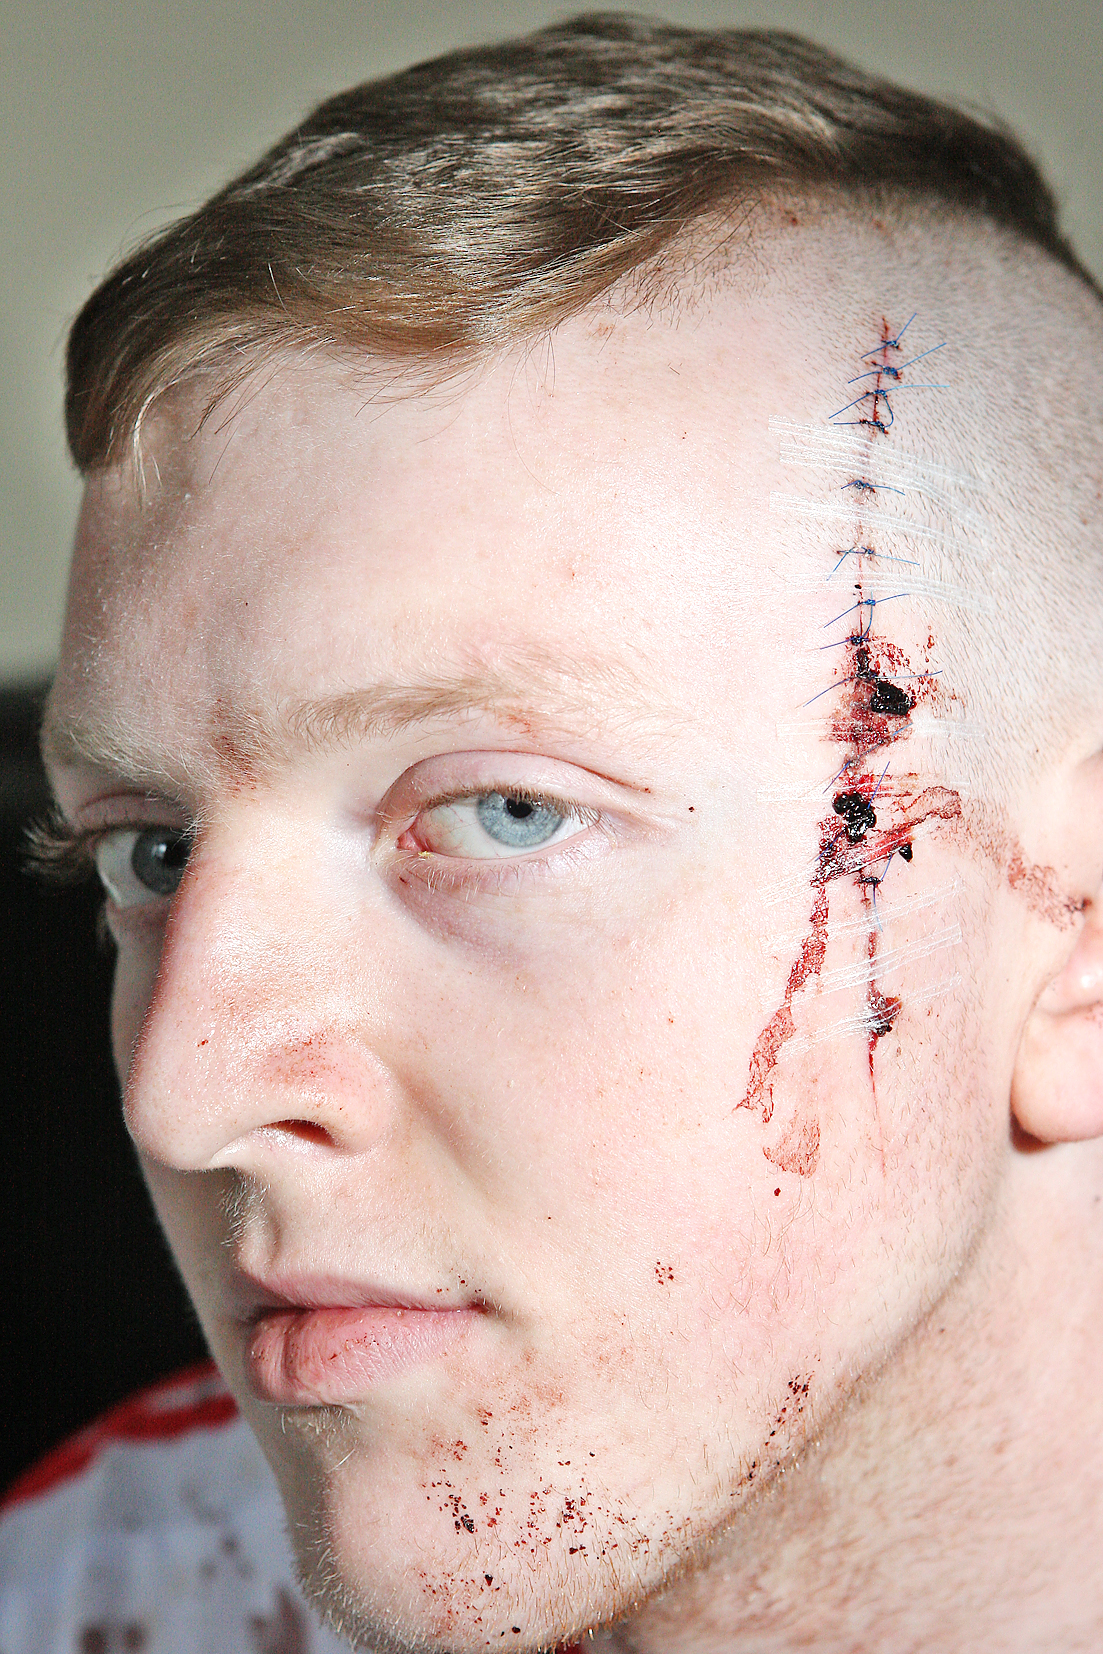 Tomás Magennis was held down on the sofa and slashed with a  Stanley knife. The appalling wound required 13 stitches